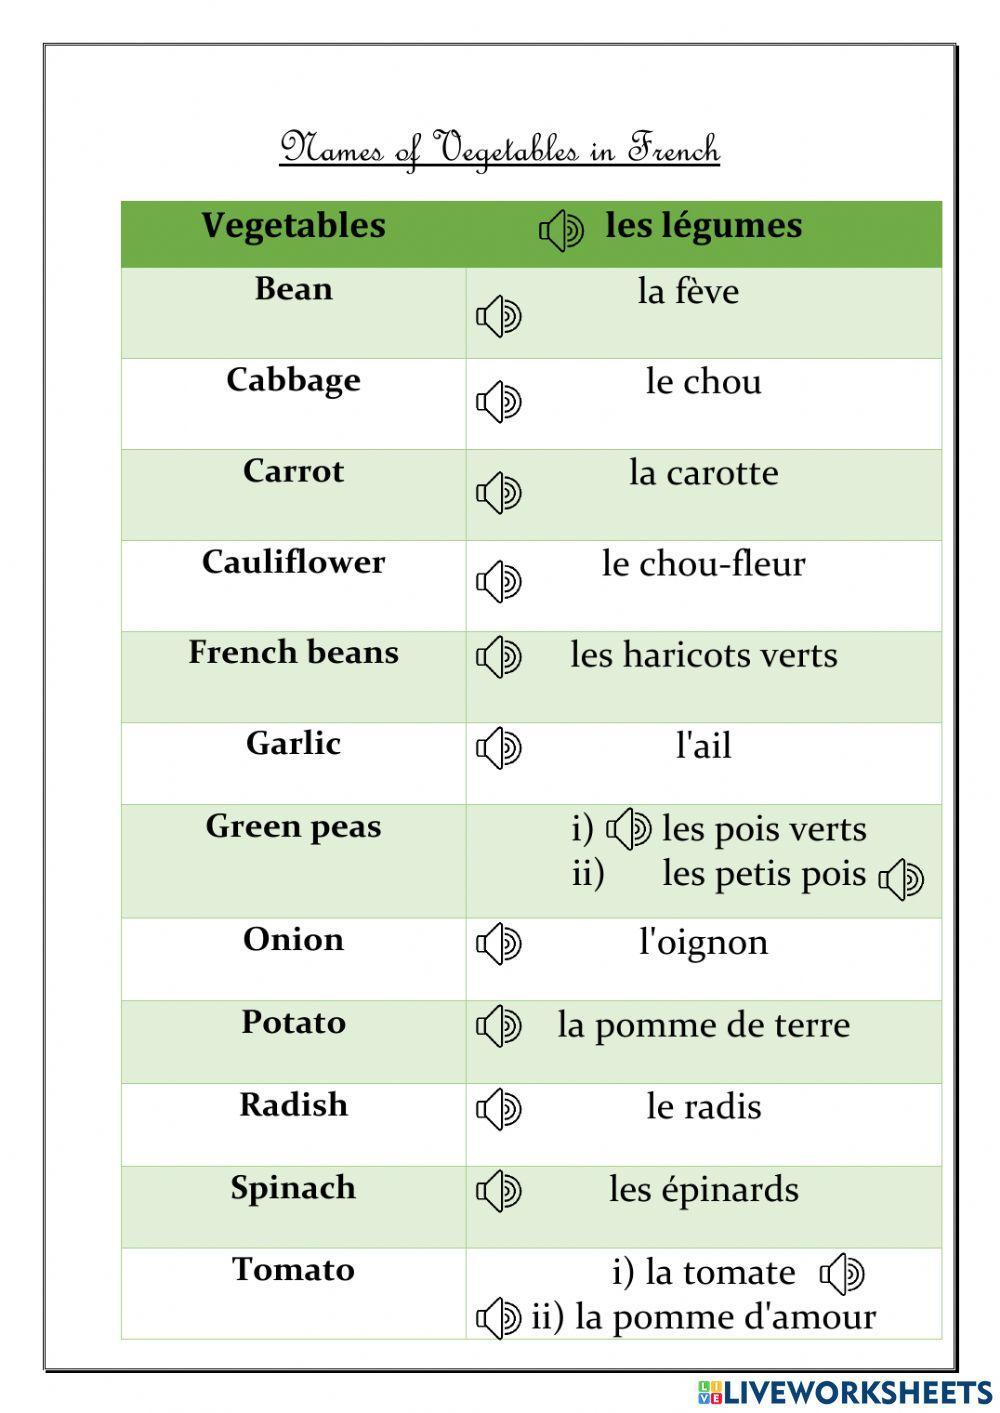 Fruits and vegetables in French